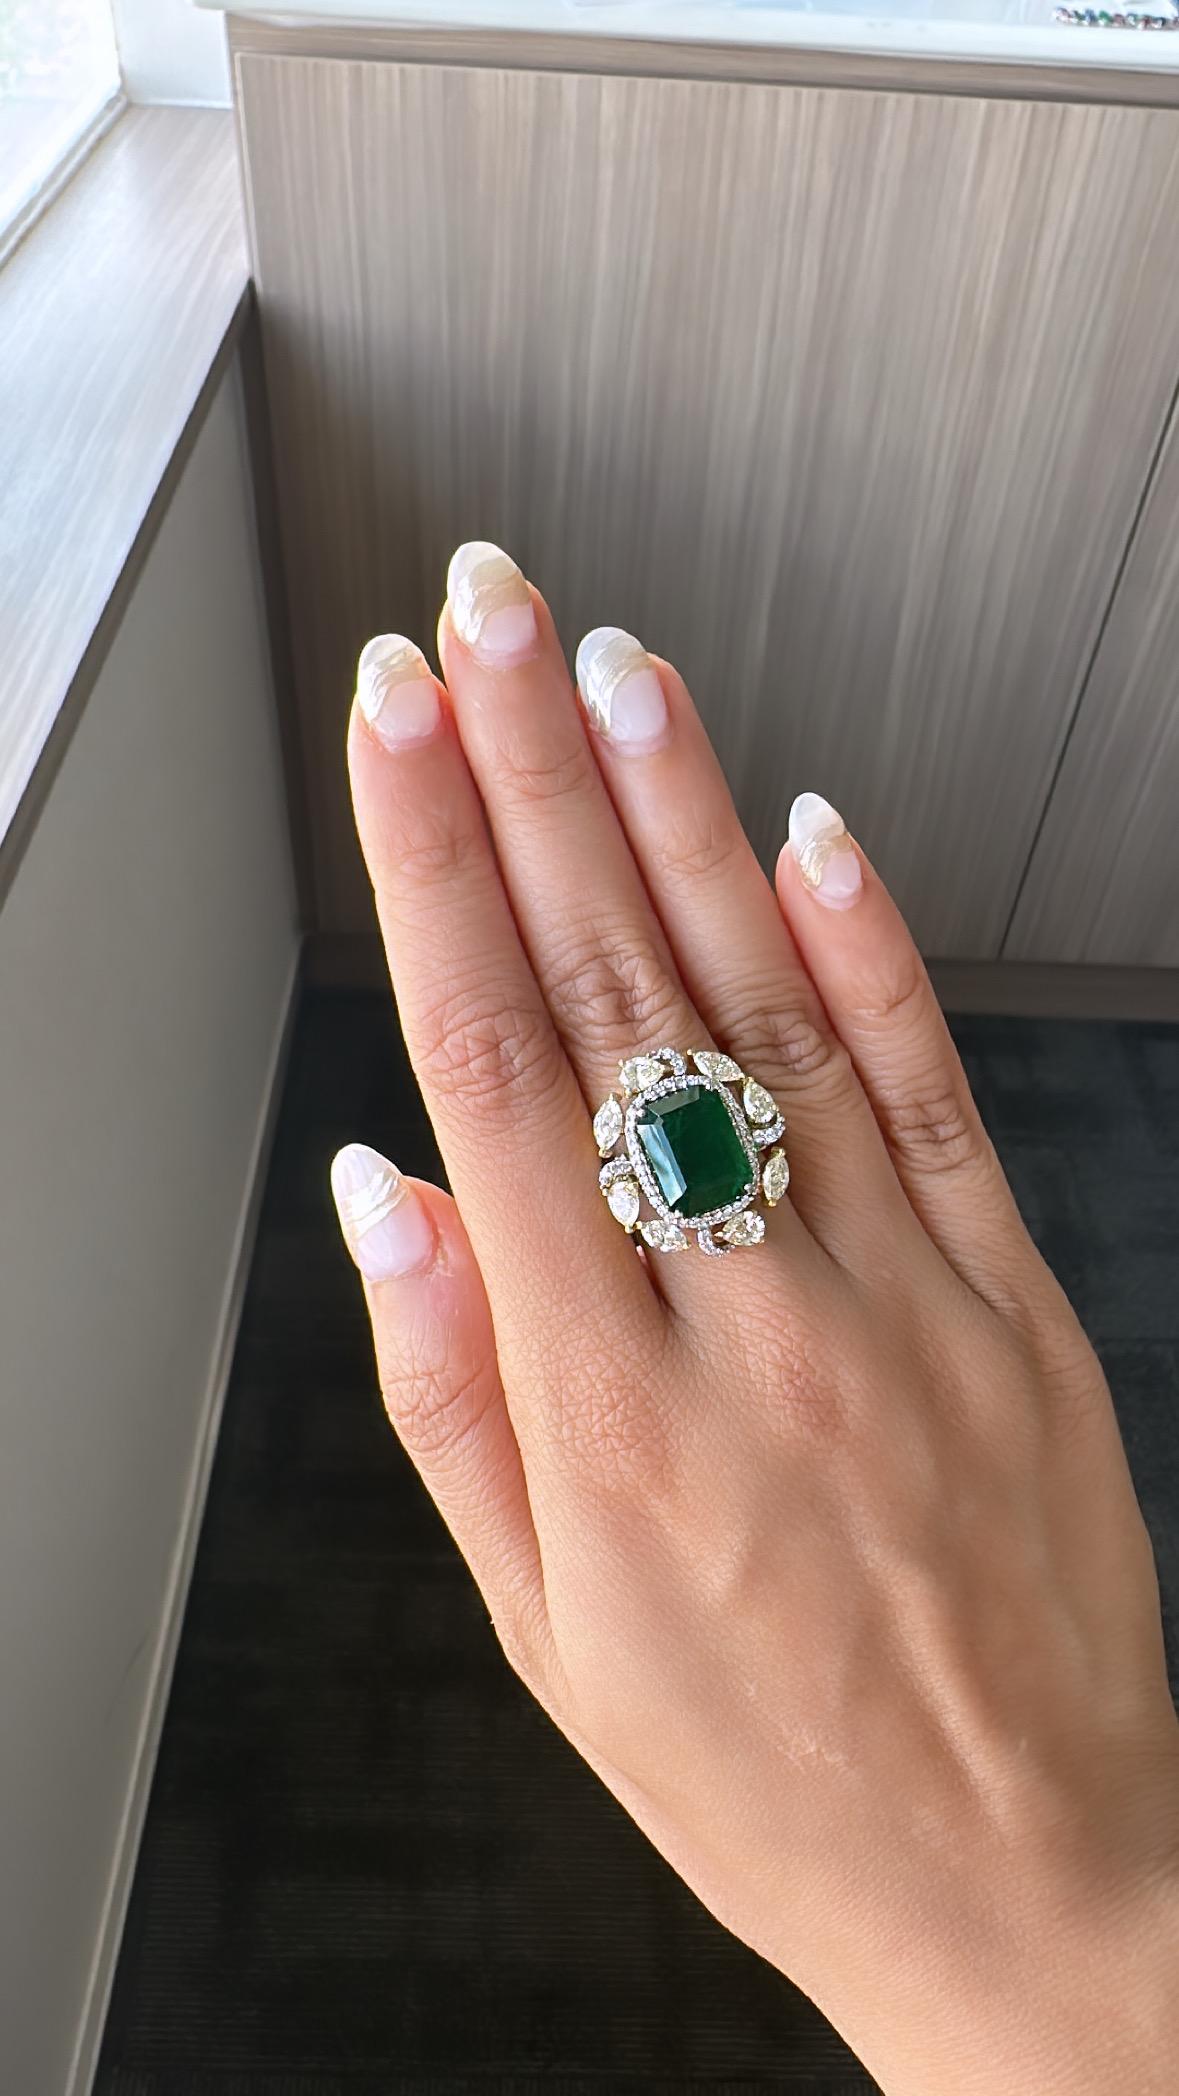 A very gorgeous and one of a kind, Emerald Cocktail / Engagement Ring set in 18K White Gold & Diamonds. The weight of the Emerald is 8.92 carats. The Emerald is completely natural, without any treatment and is of Zambian origin. The weight of the